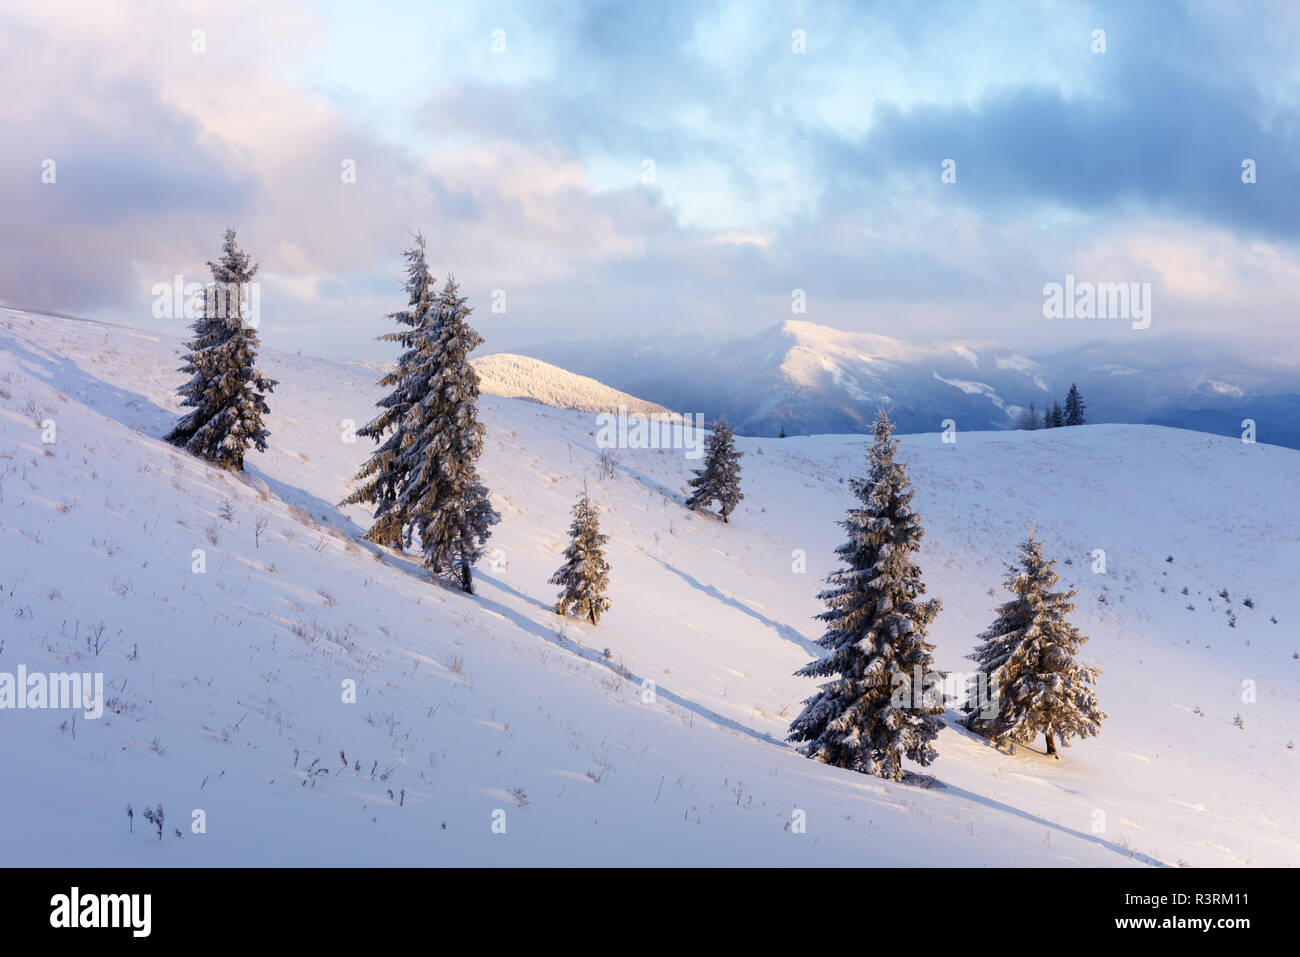 Fantastic orange winter landscape in snowy mountains glowing by sunlight. Dramatic wintry scene with snowy trees. Christmas holiday concept. Stock Photo